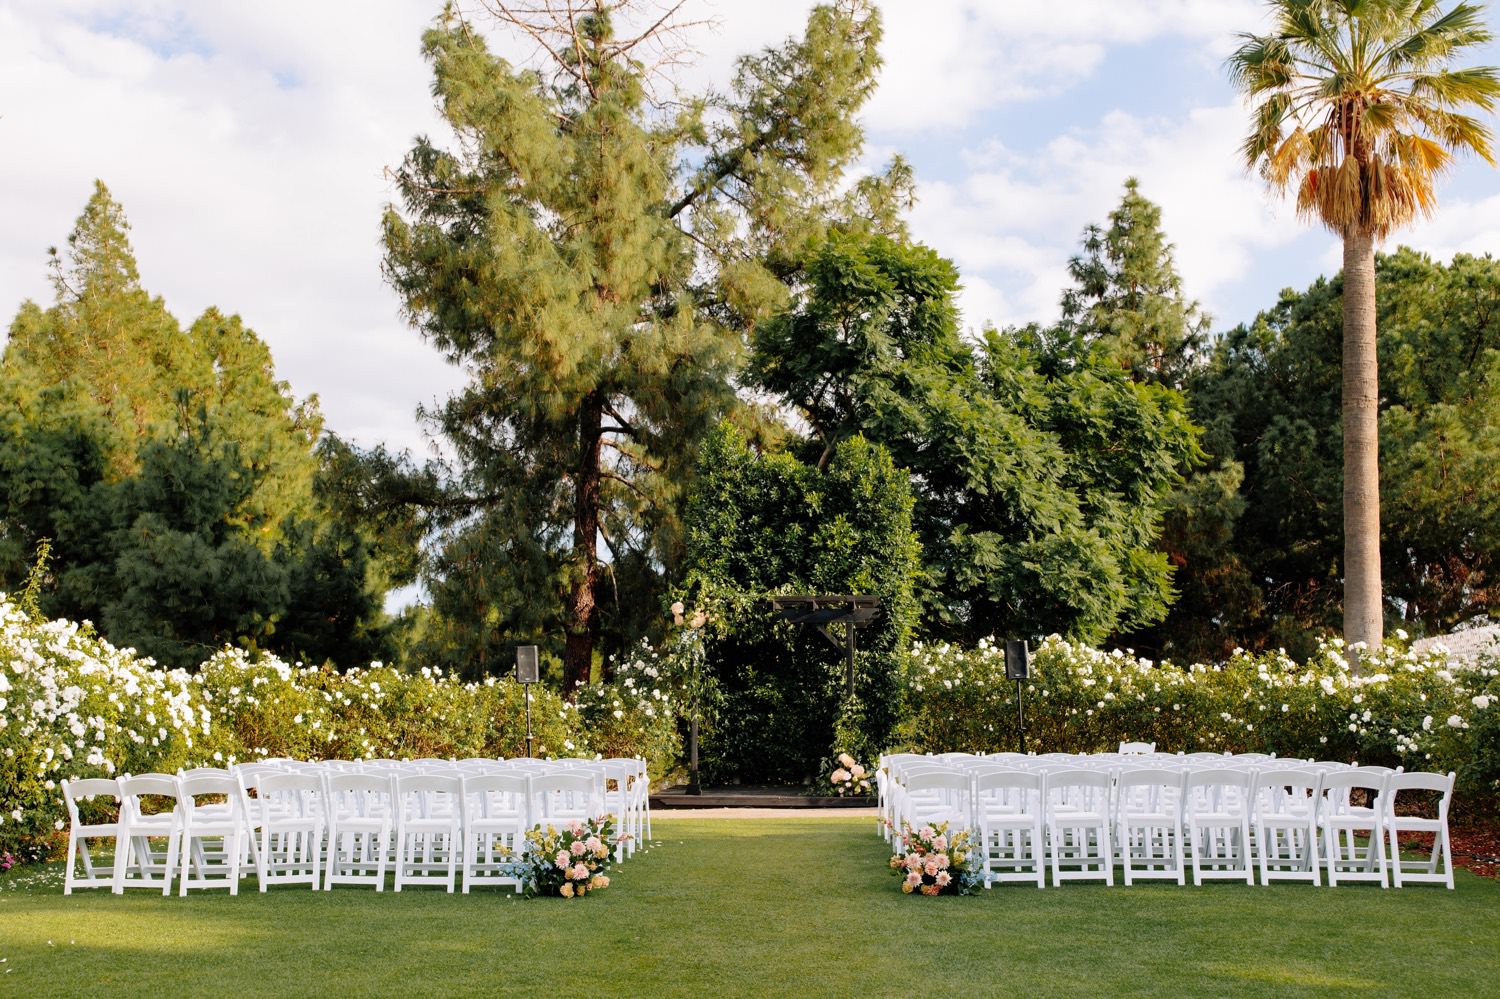 spring outdoor garden wedding photographed by Magaly Barajas; wedding at Knollwood Country Club in Granada Hills